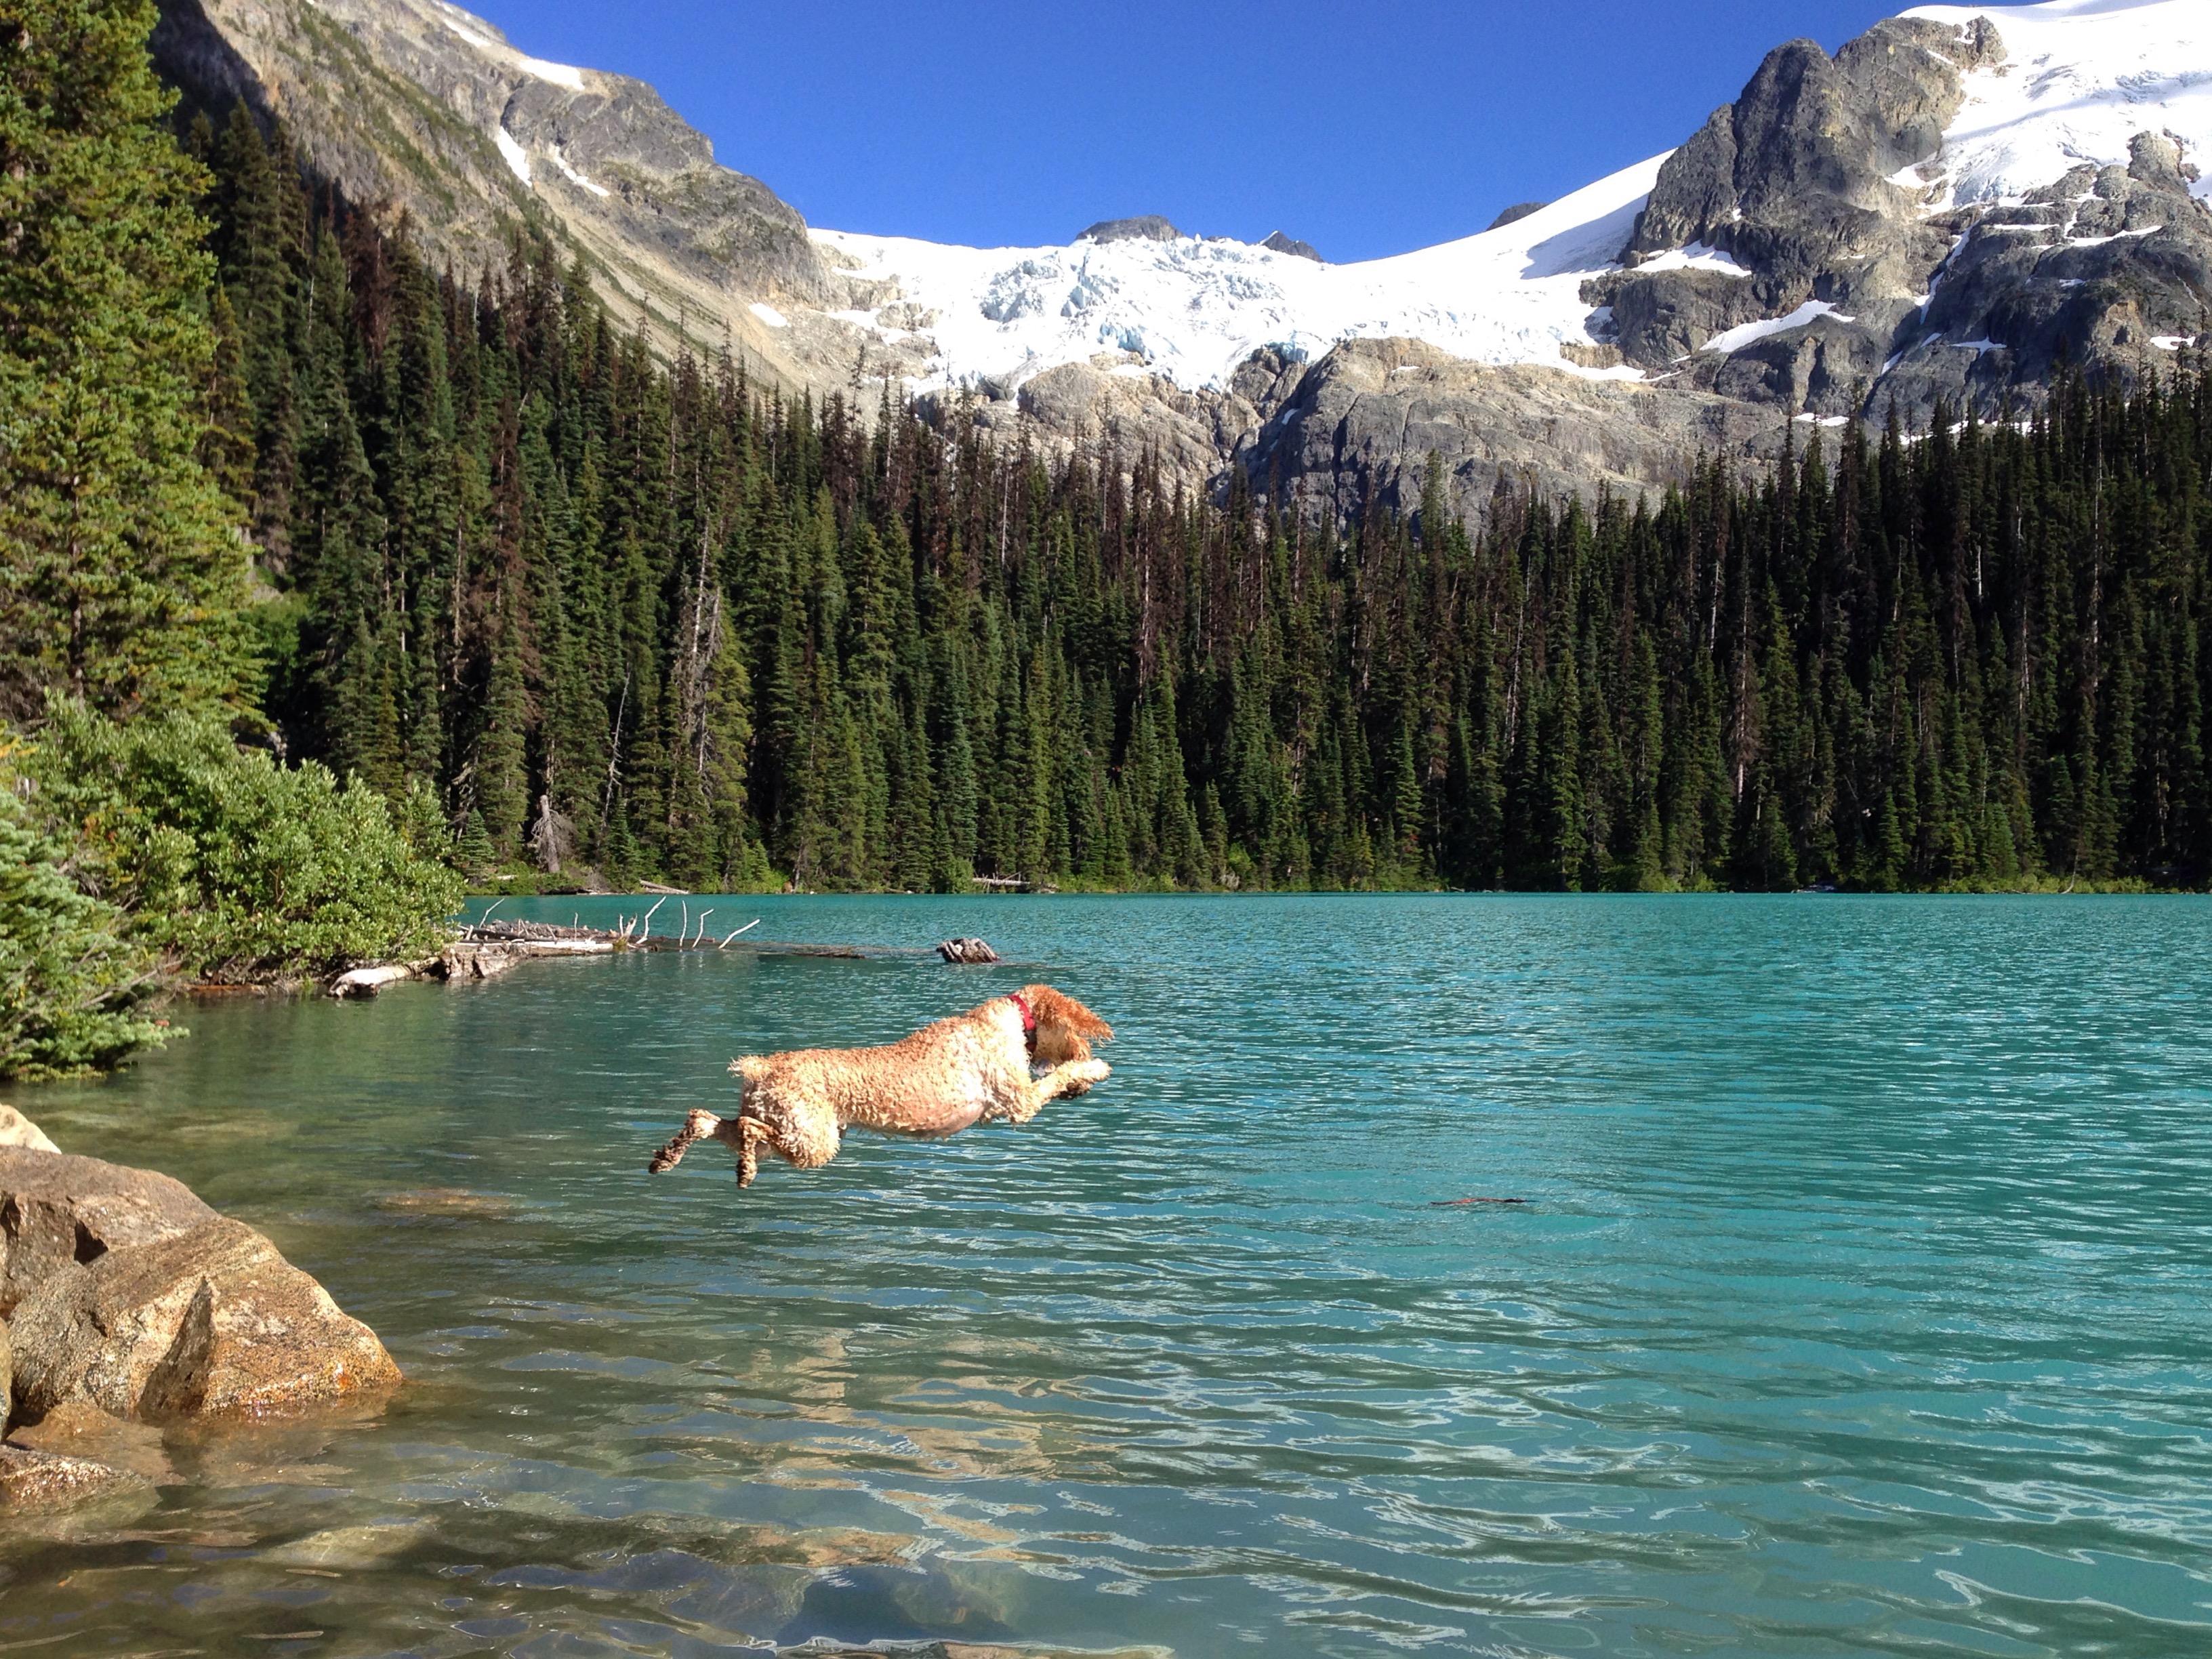 Rugby Jumping into One of the Joffre Lakes